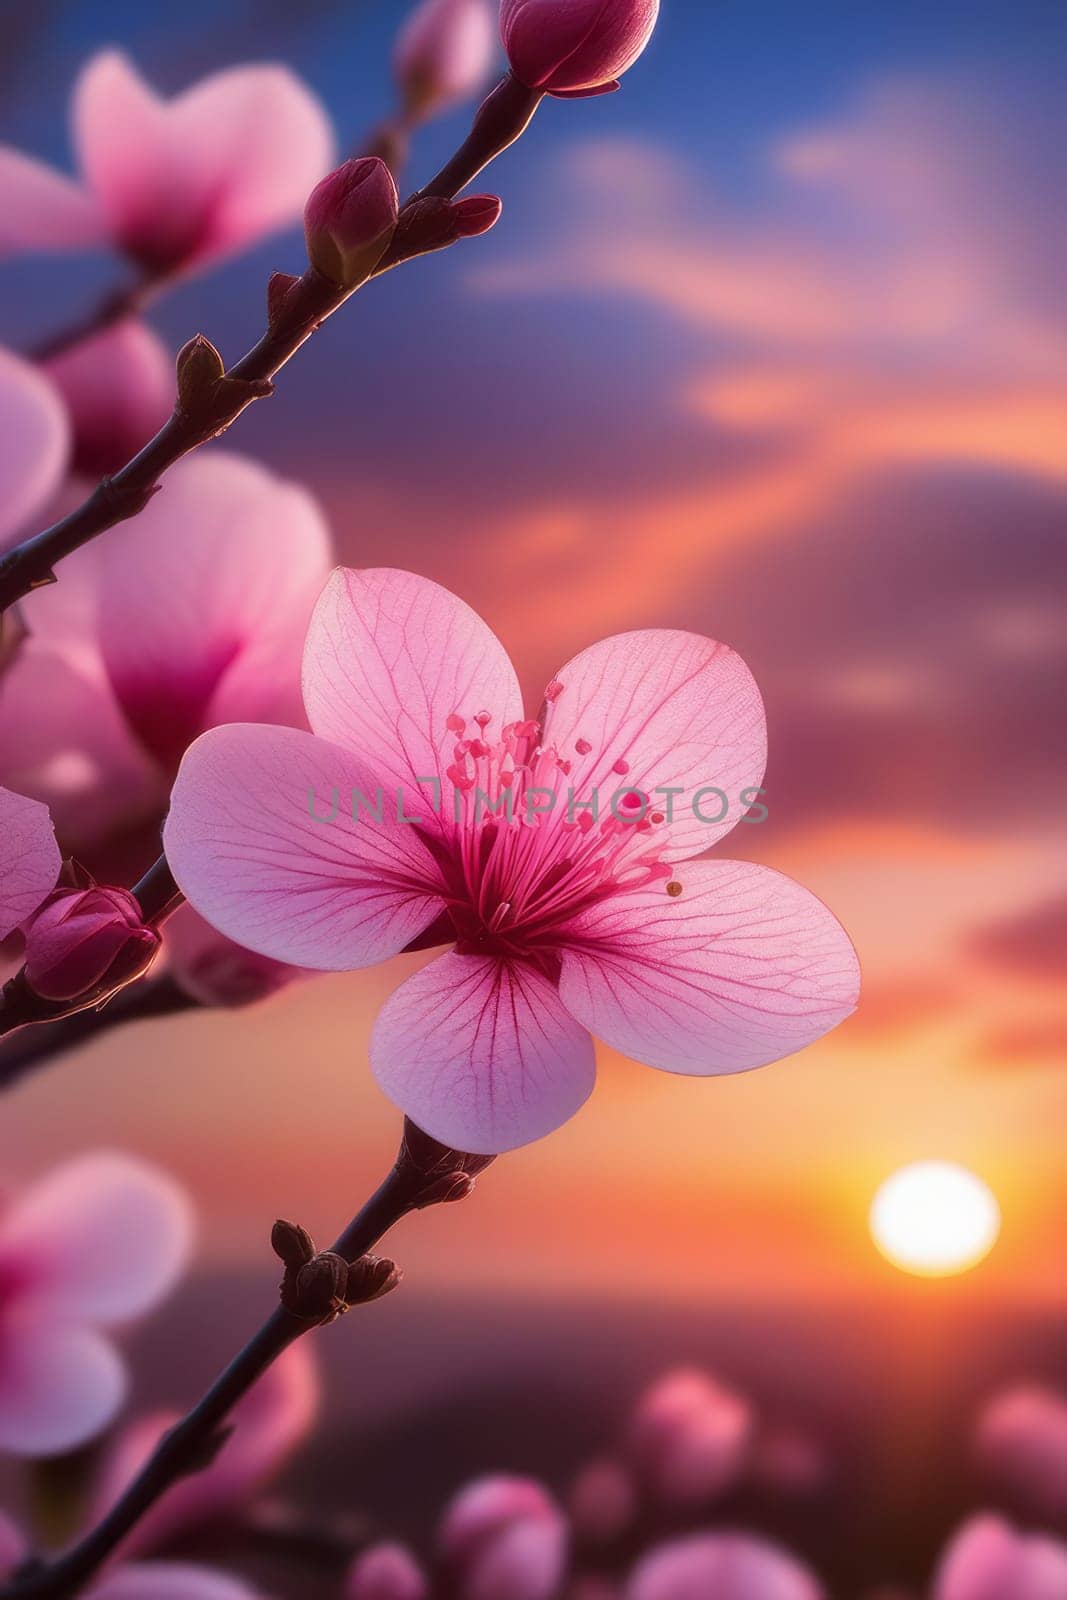 Branches with fresh pink flowers in full bloom against the sunset sky